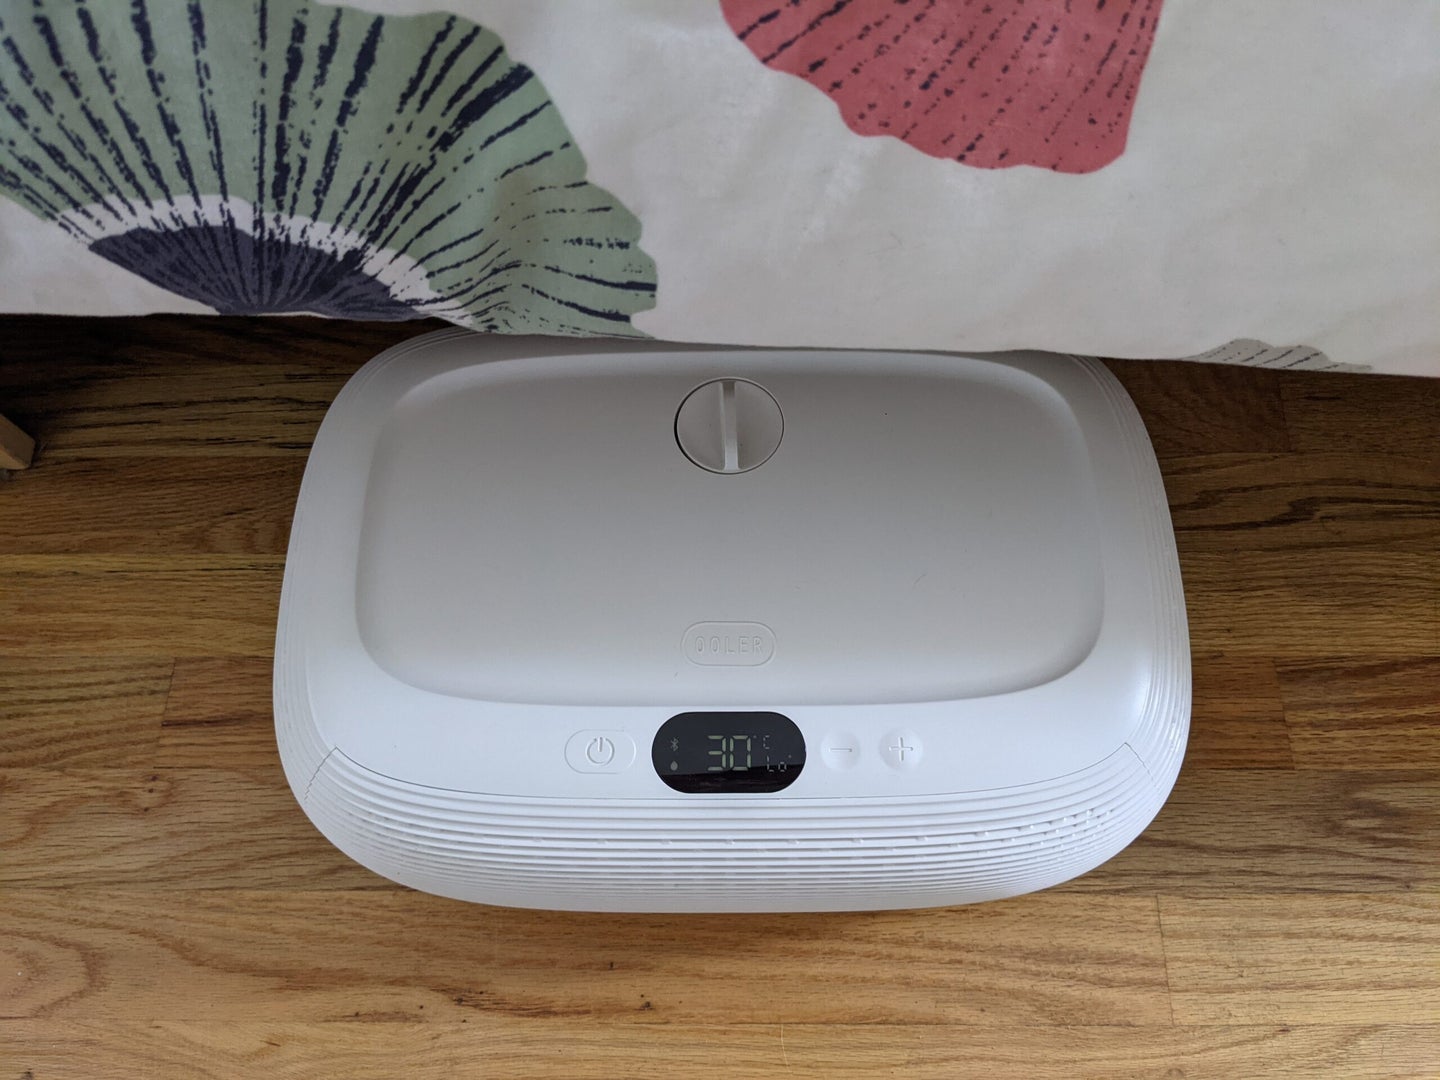 chilipad or ooler - Ooler Review: app-based mattress cooling and heating system -  SleepGadgets.io